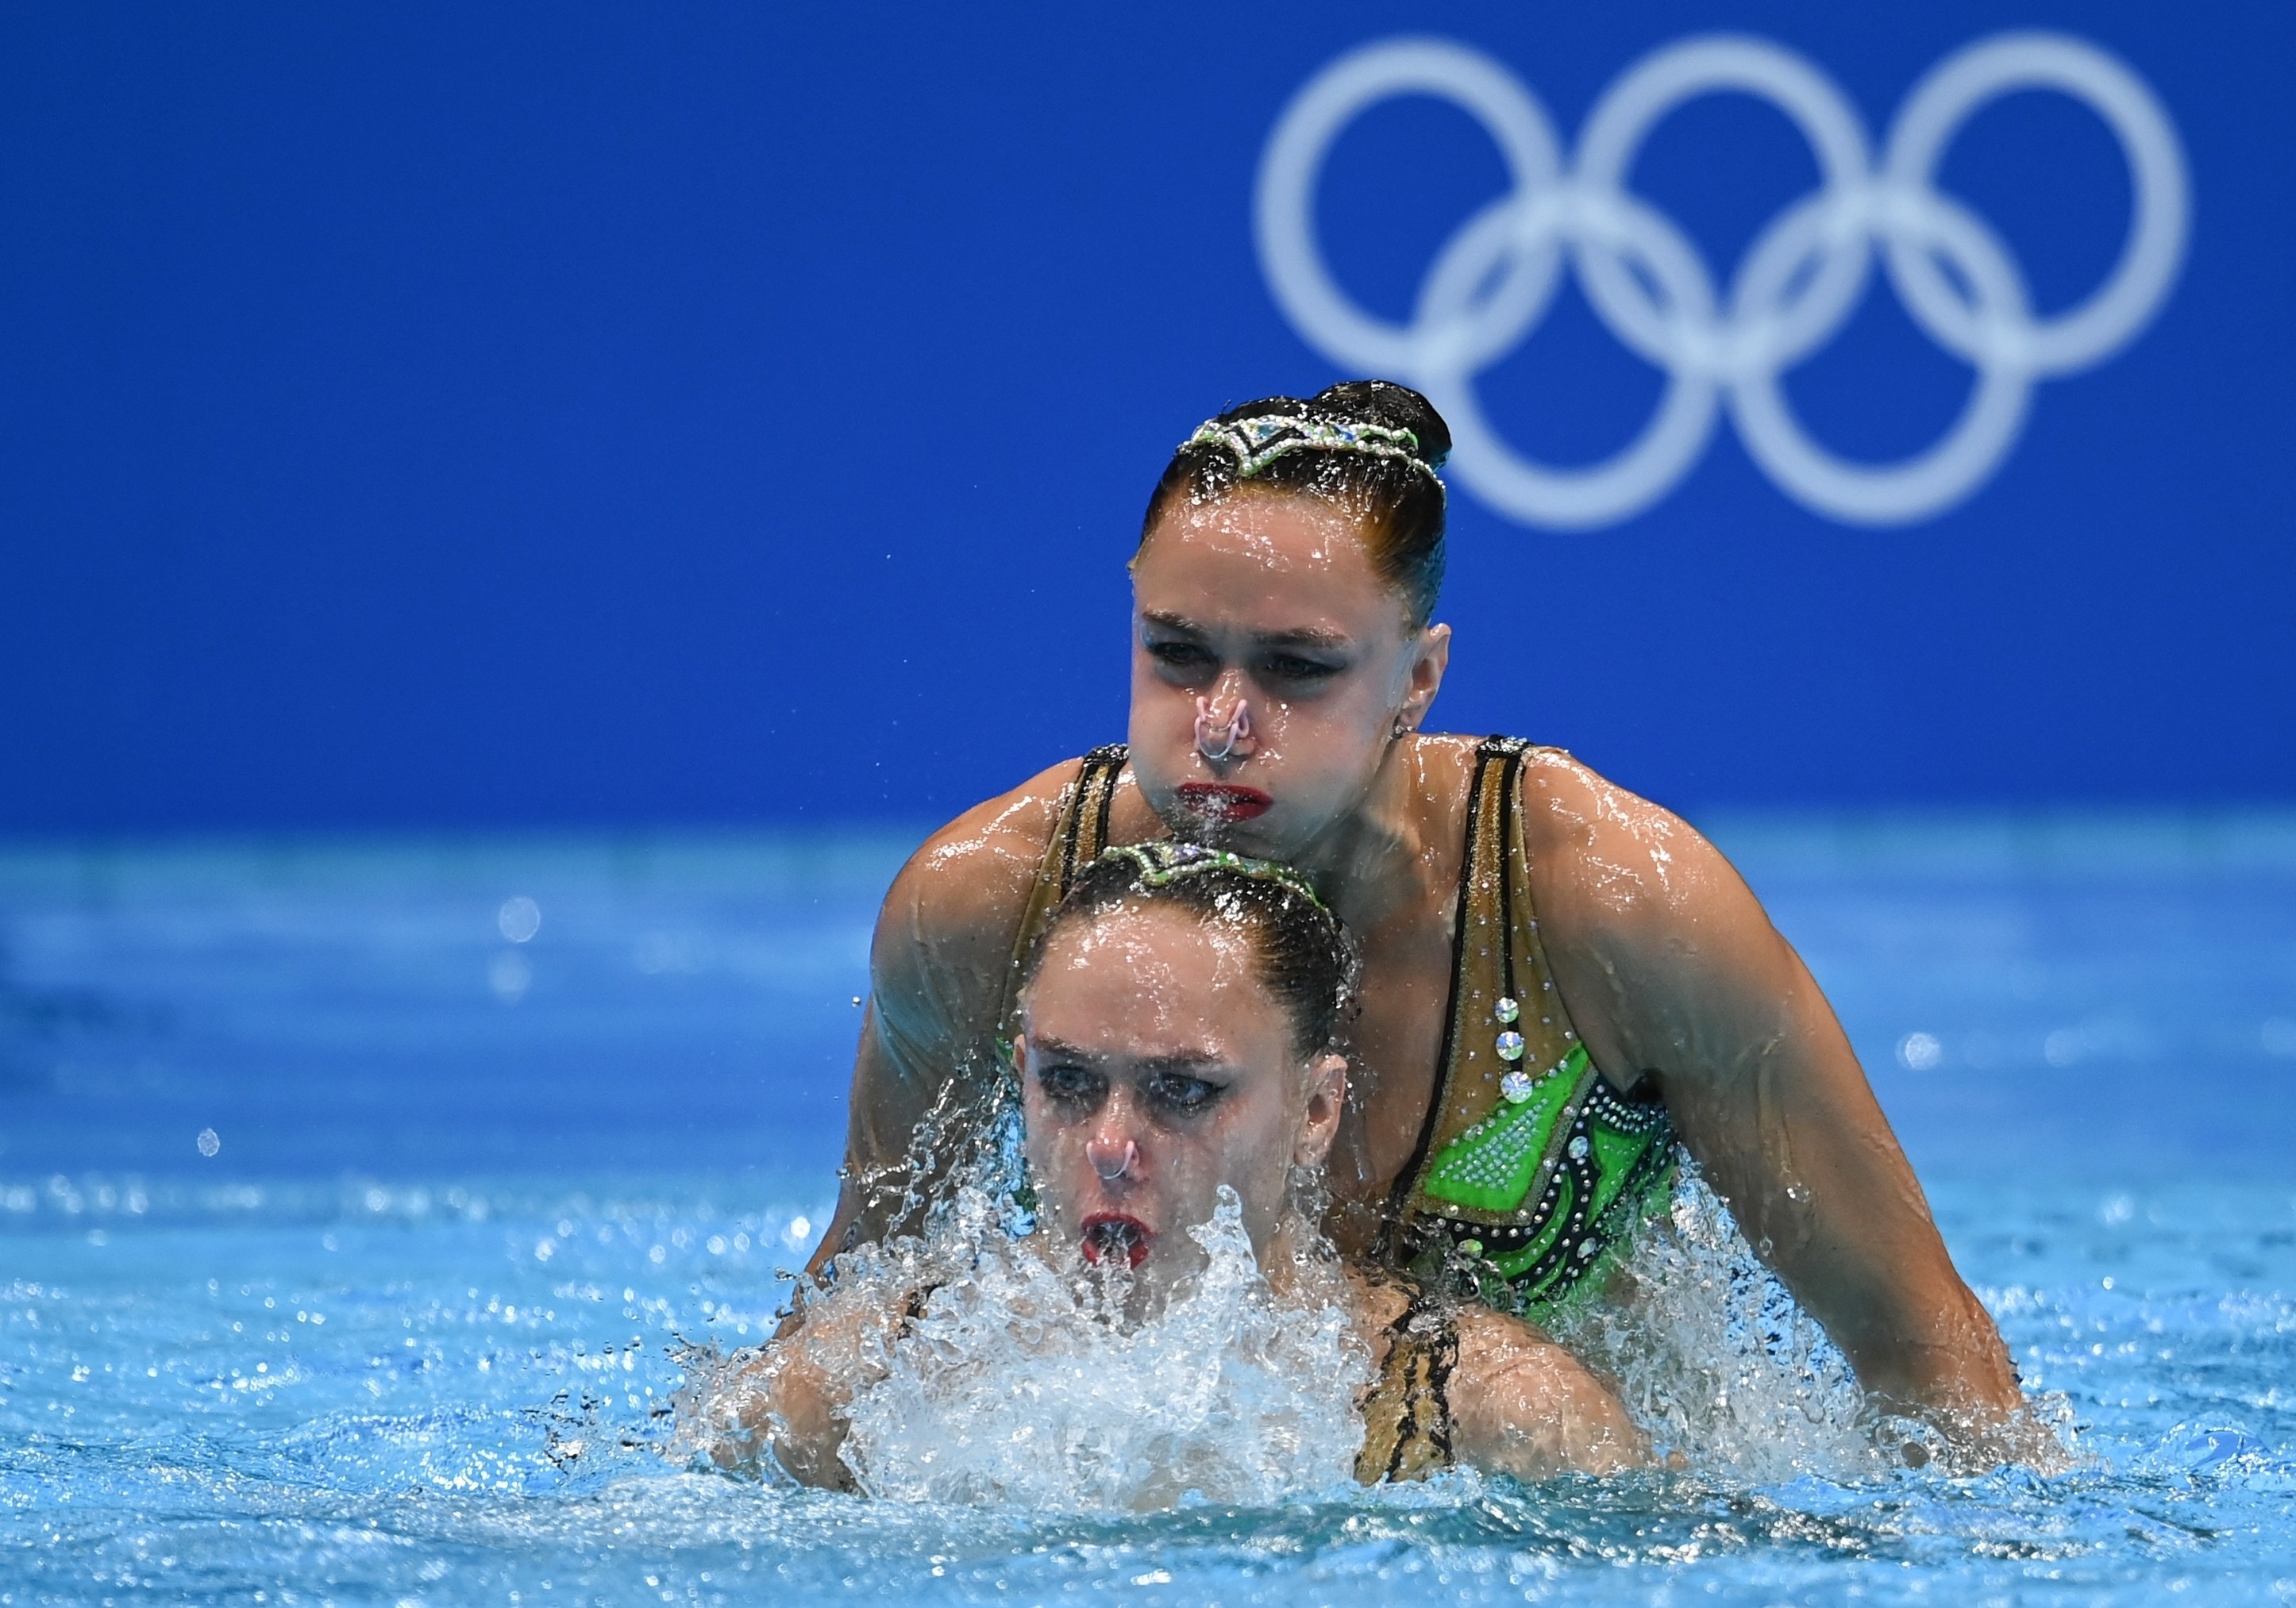 Two women swimmers perform in the pool at the Tokyo Olympics